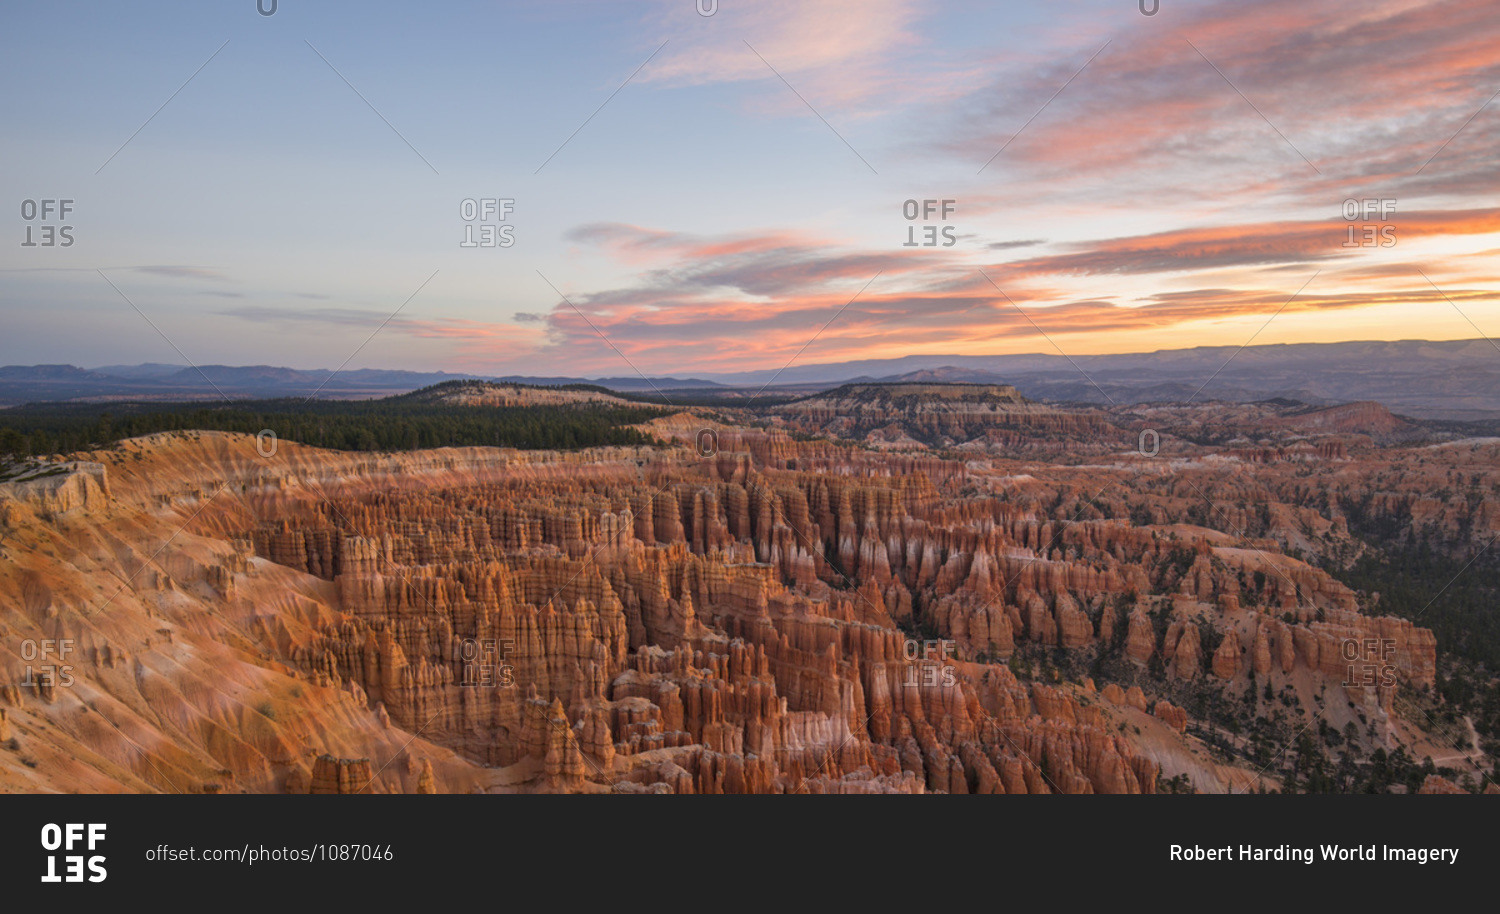 Panoramic view over the Silent City from the Rim Trail at Inspiration Point, dawn, Bryce Canyon National Park, Utah, United States of America, North America